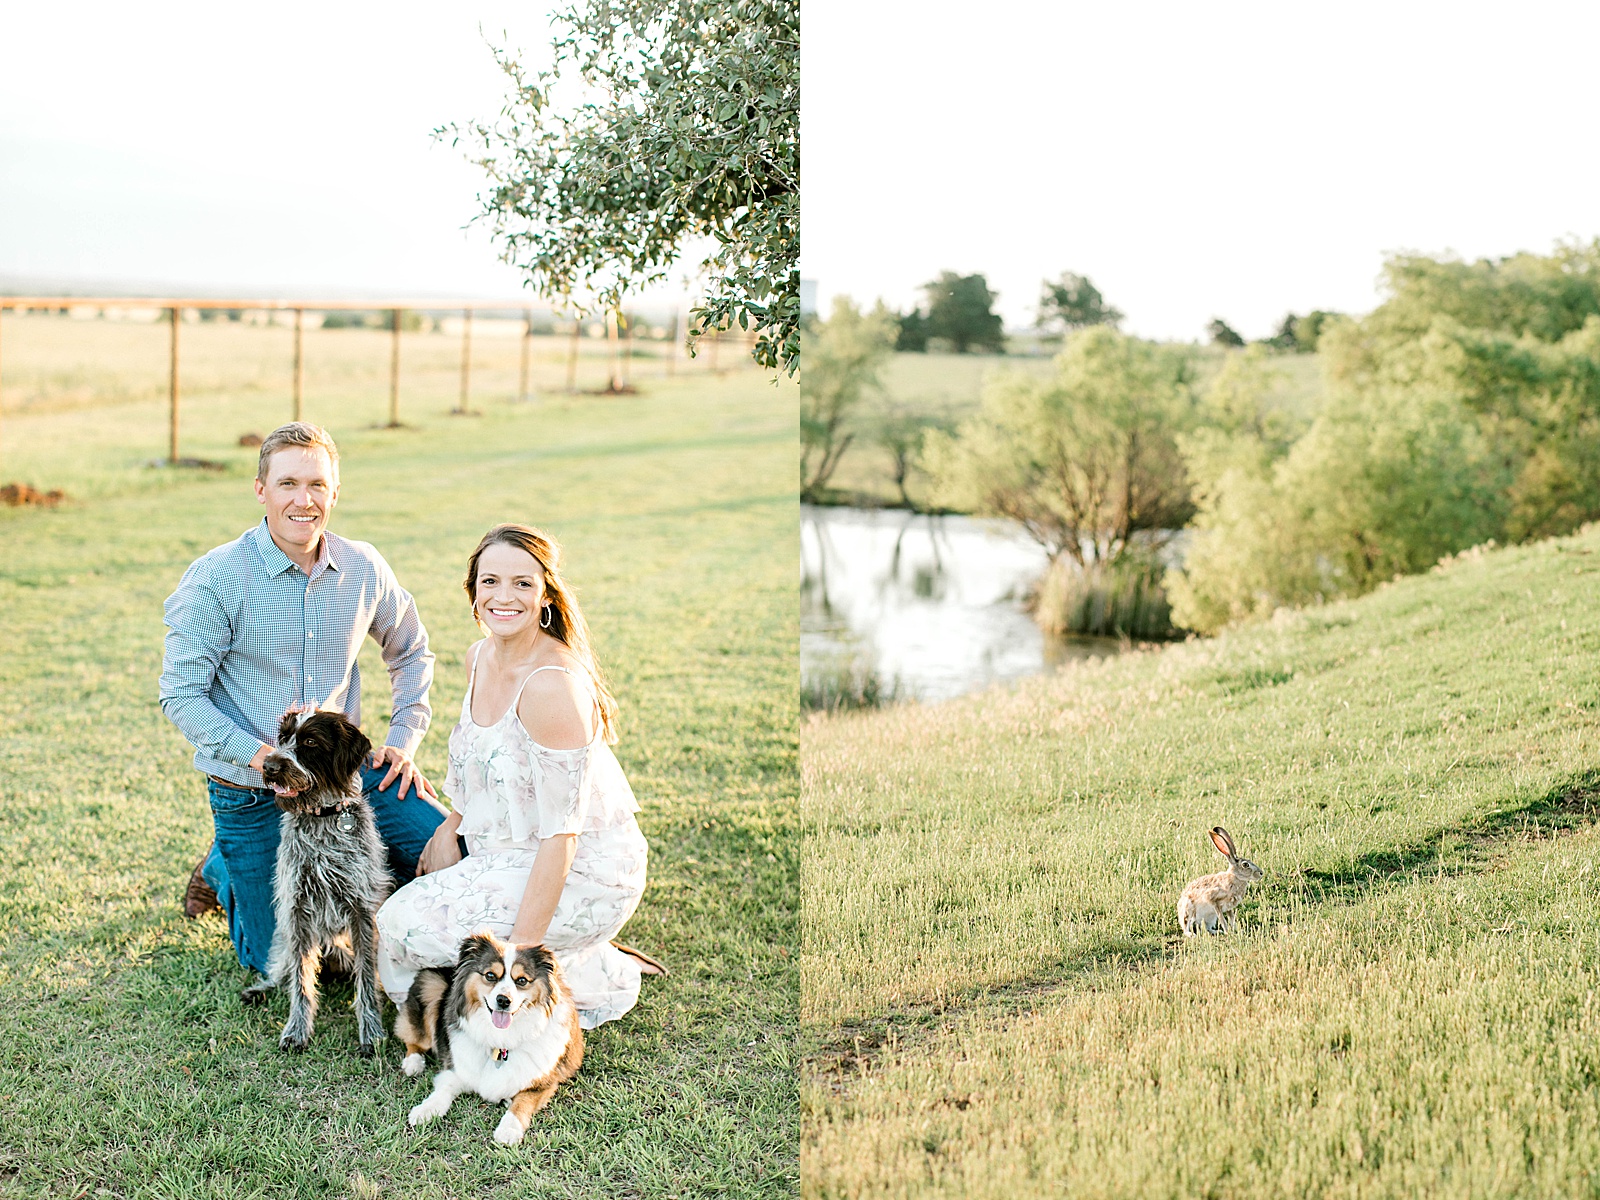 couple poses for maternity photos with dogs in el reno oklahoma